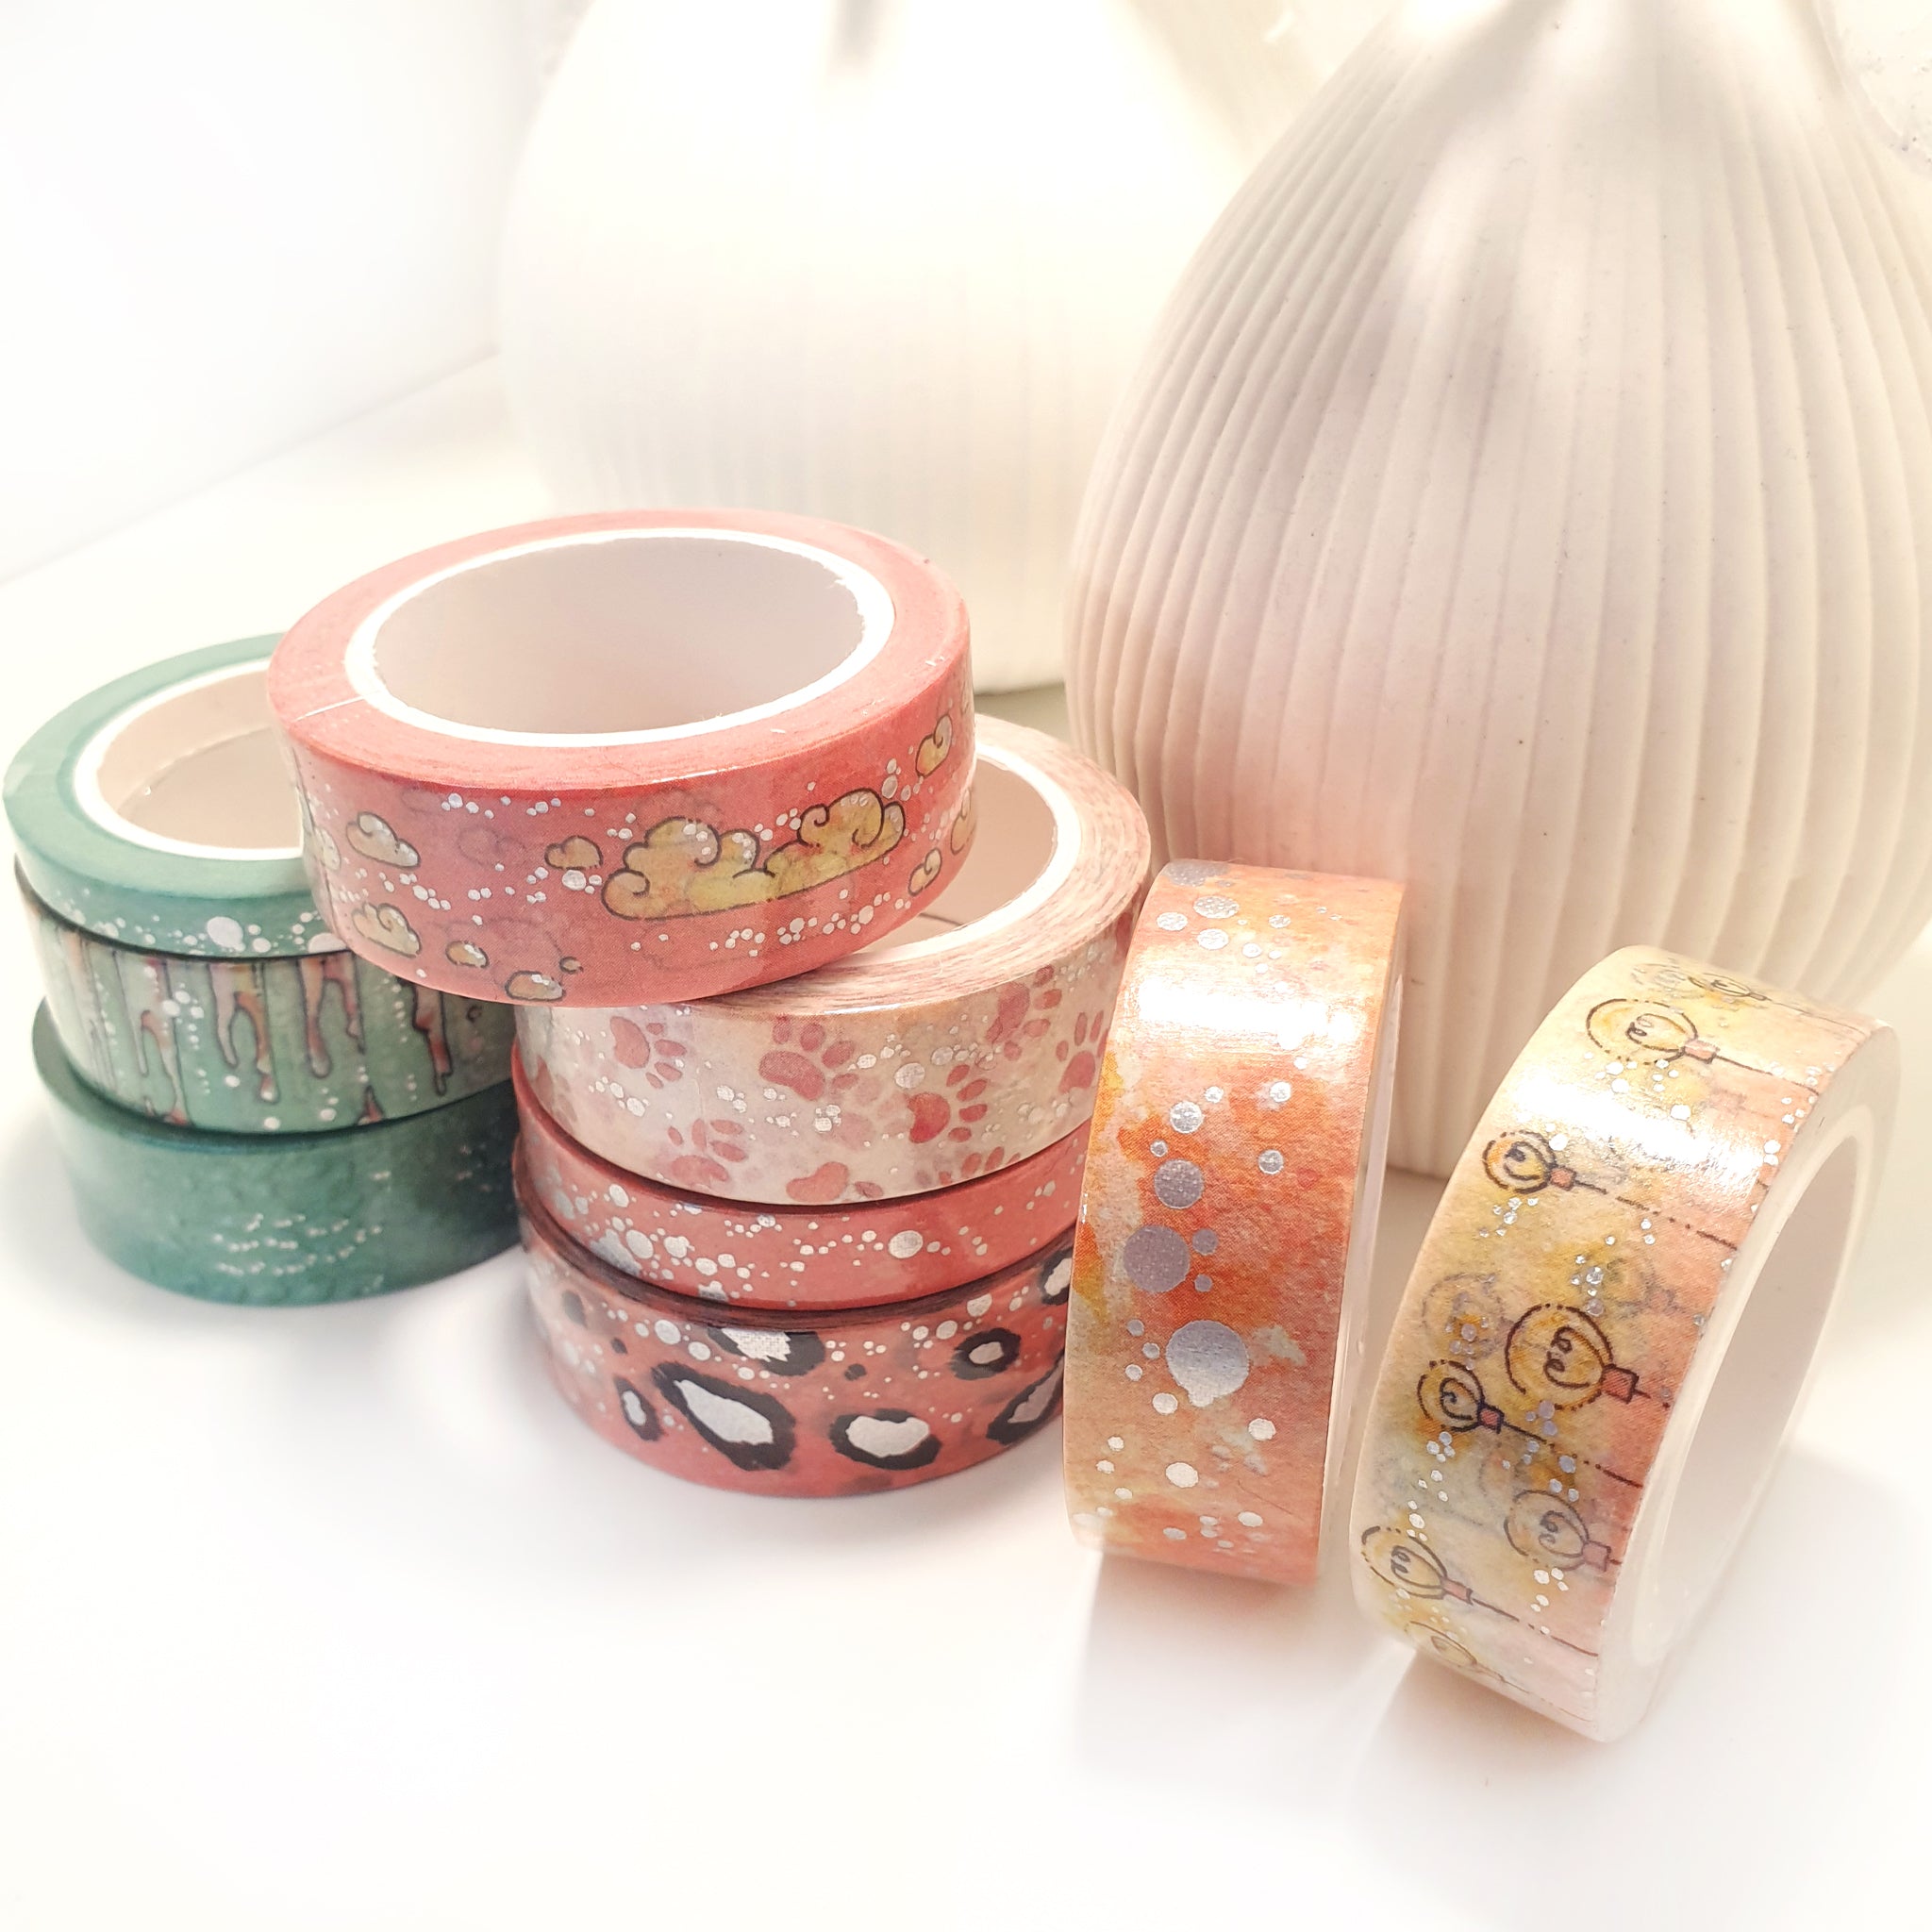 Some creative washi tapes